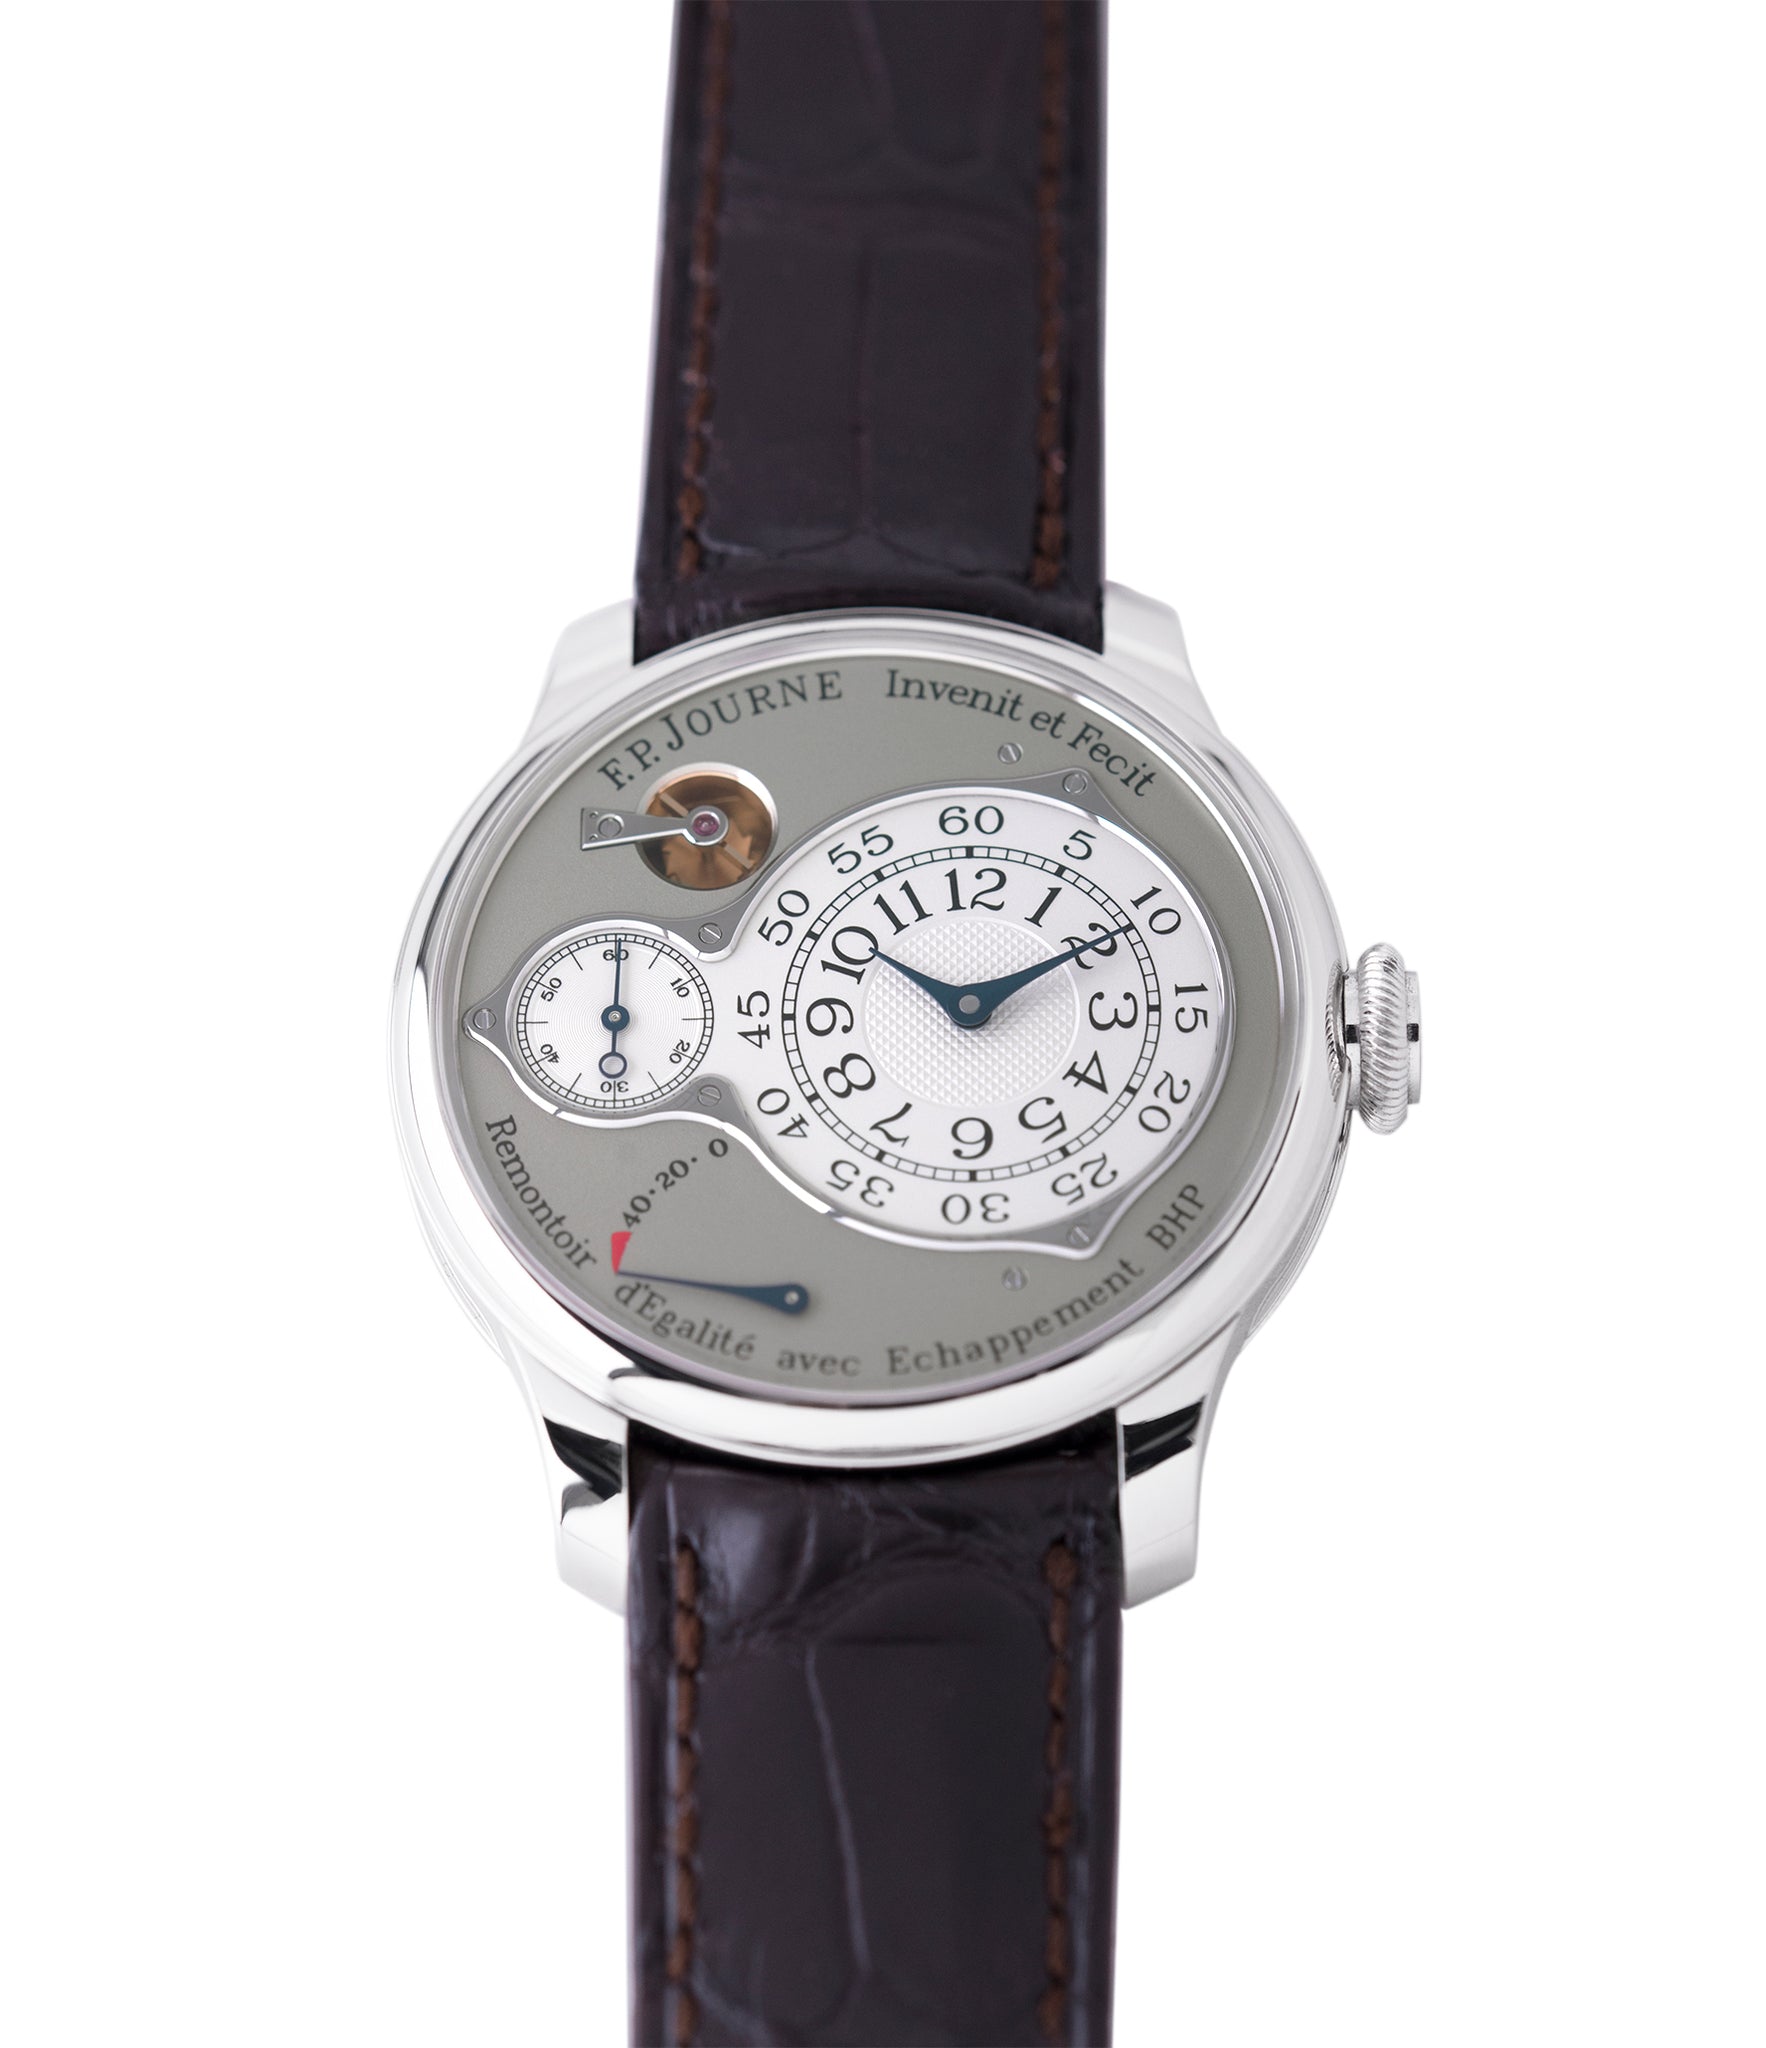 selling preowned F. P. Journe Chronometre Optimum platinum rare watch for sale online at A Collected Man London approved retailer of independent watchmakers